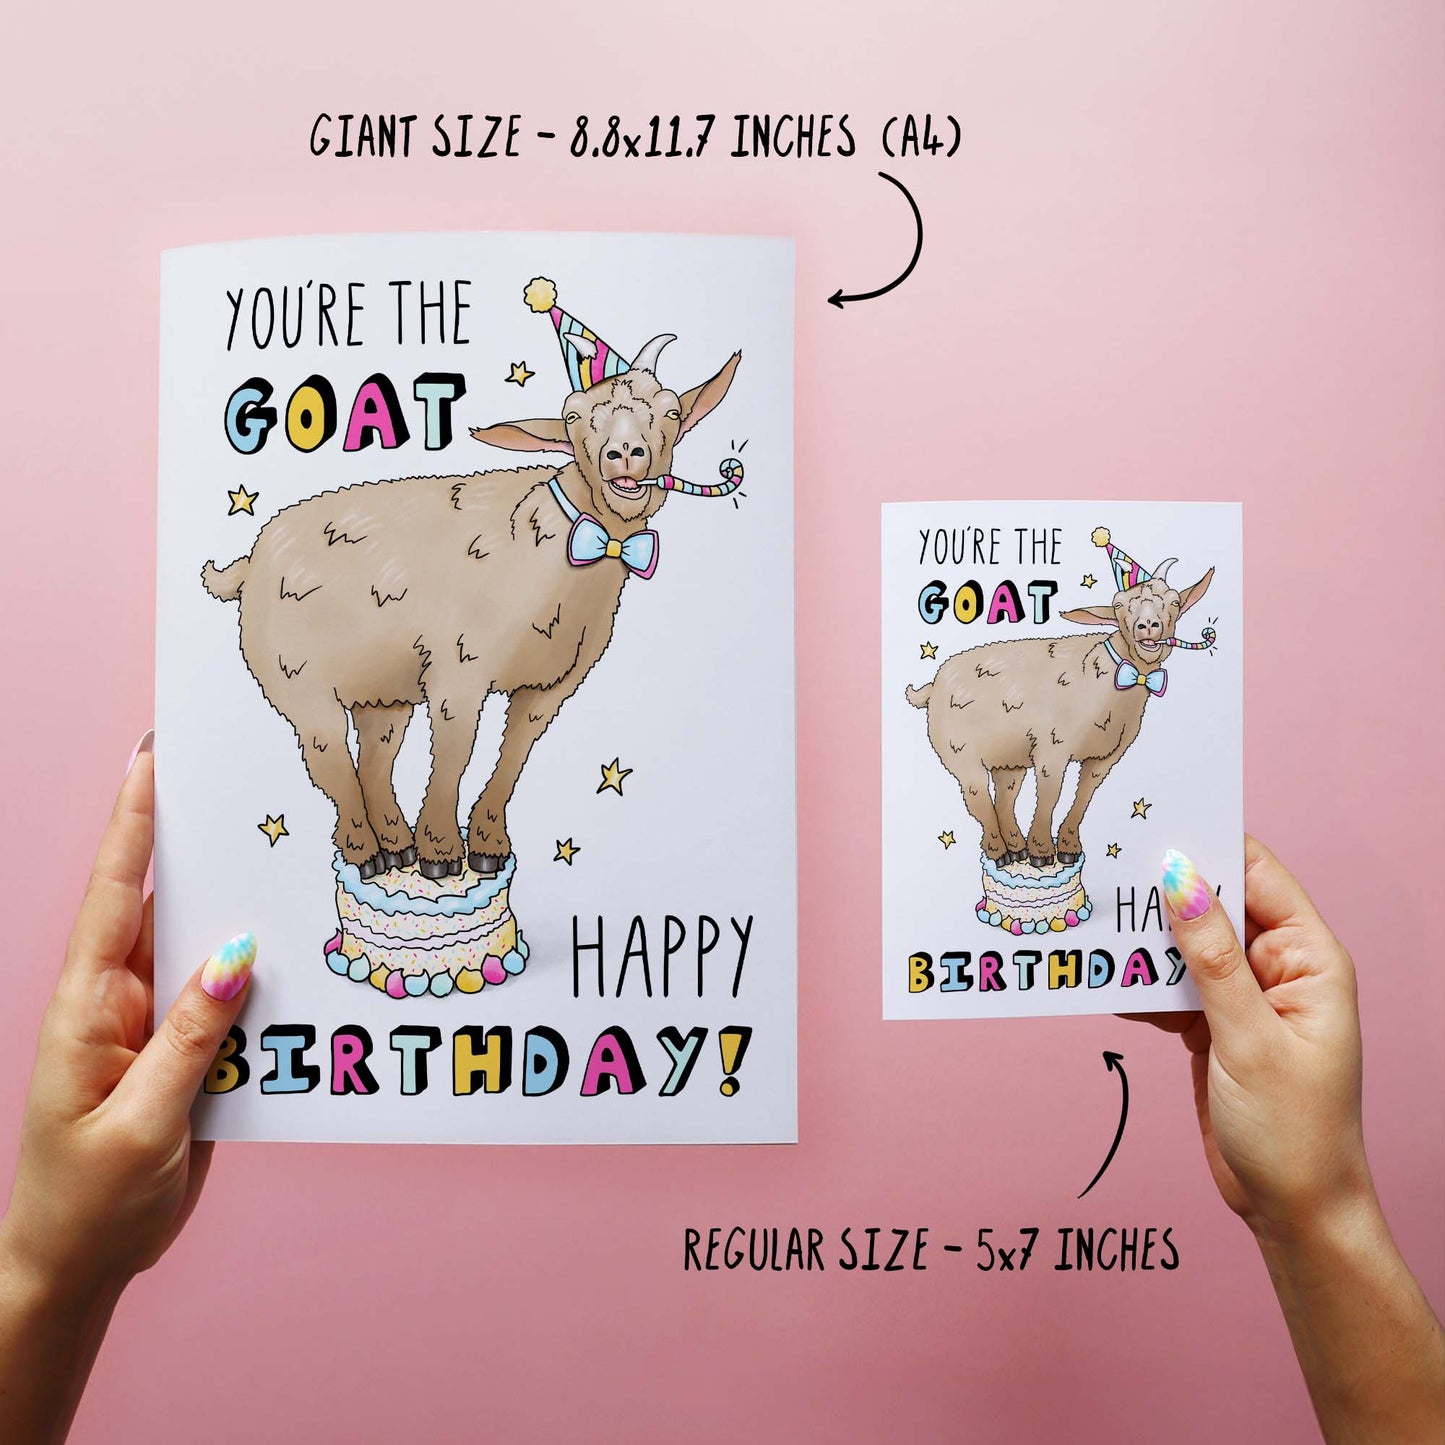 You're The Goat! - Happy Birthday Card